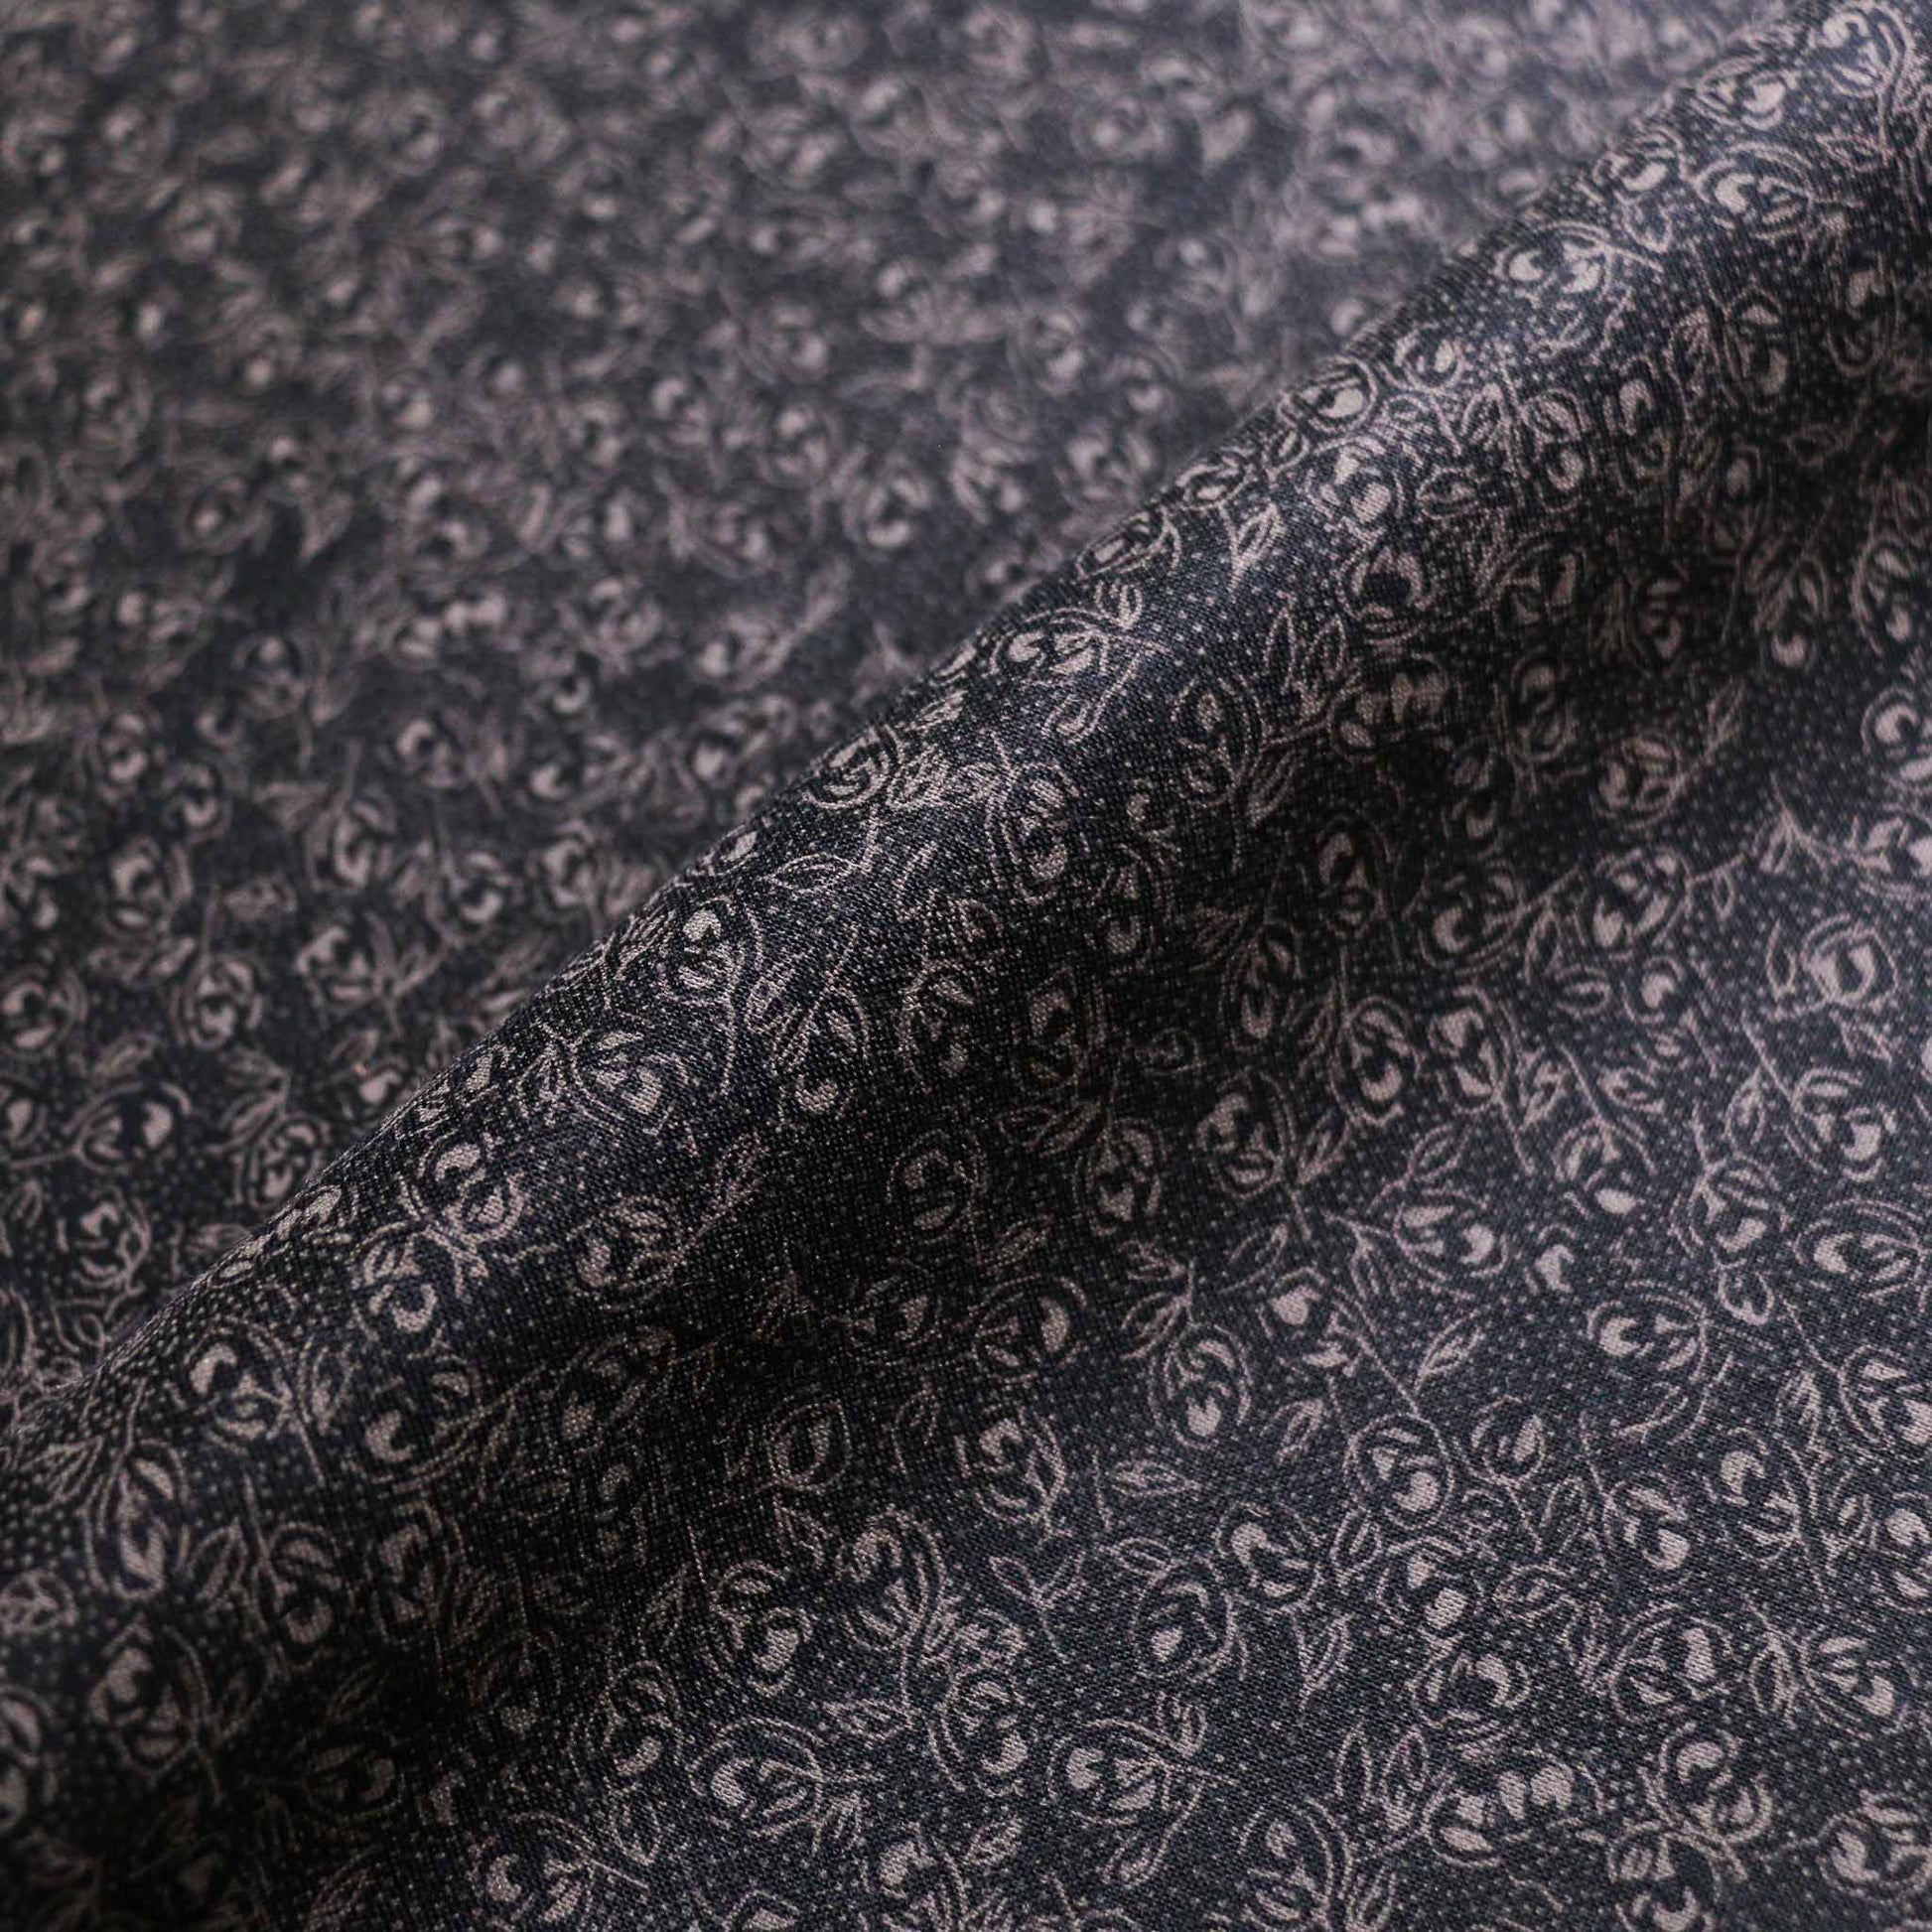 black sustainable vintage cotton dressmaking poplin fabric with small grey floral print